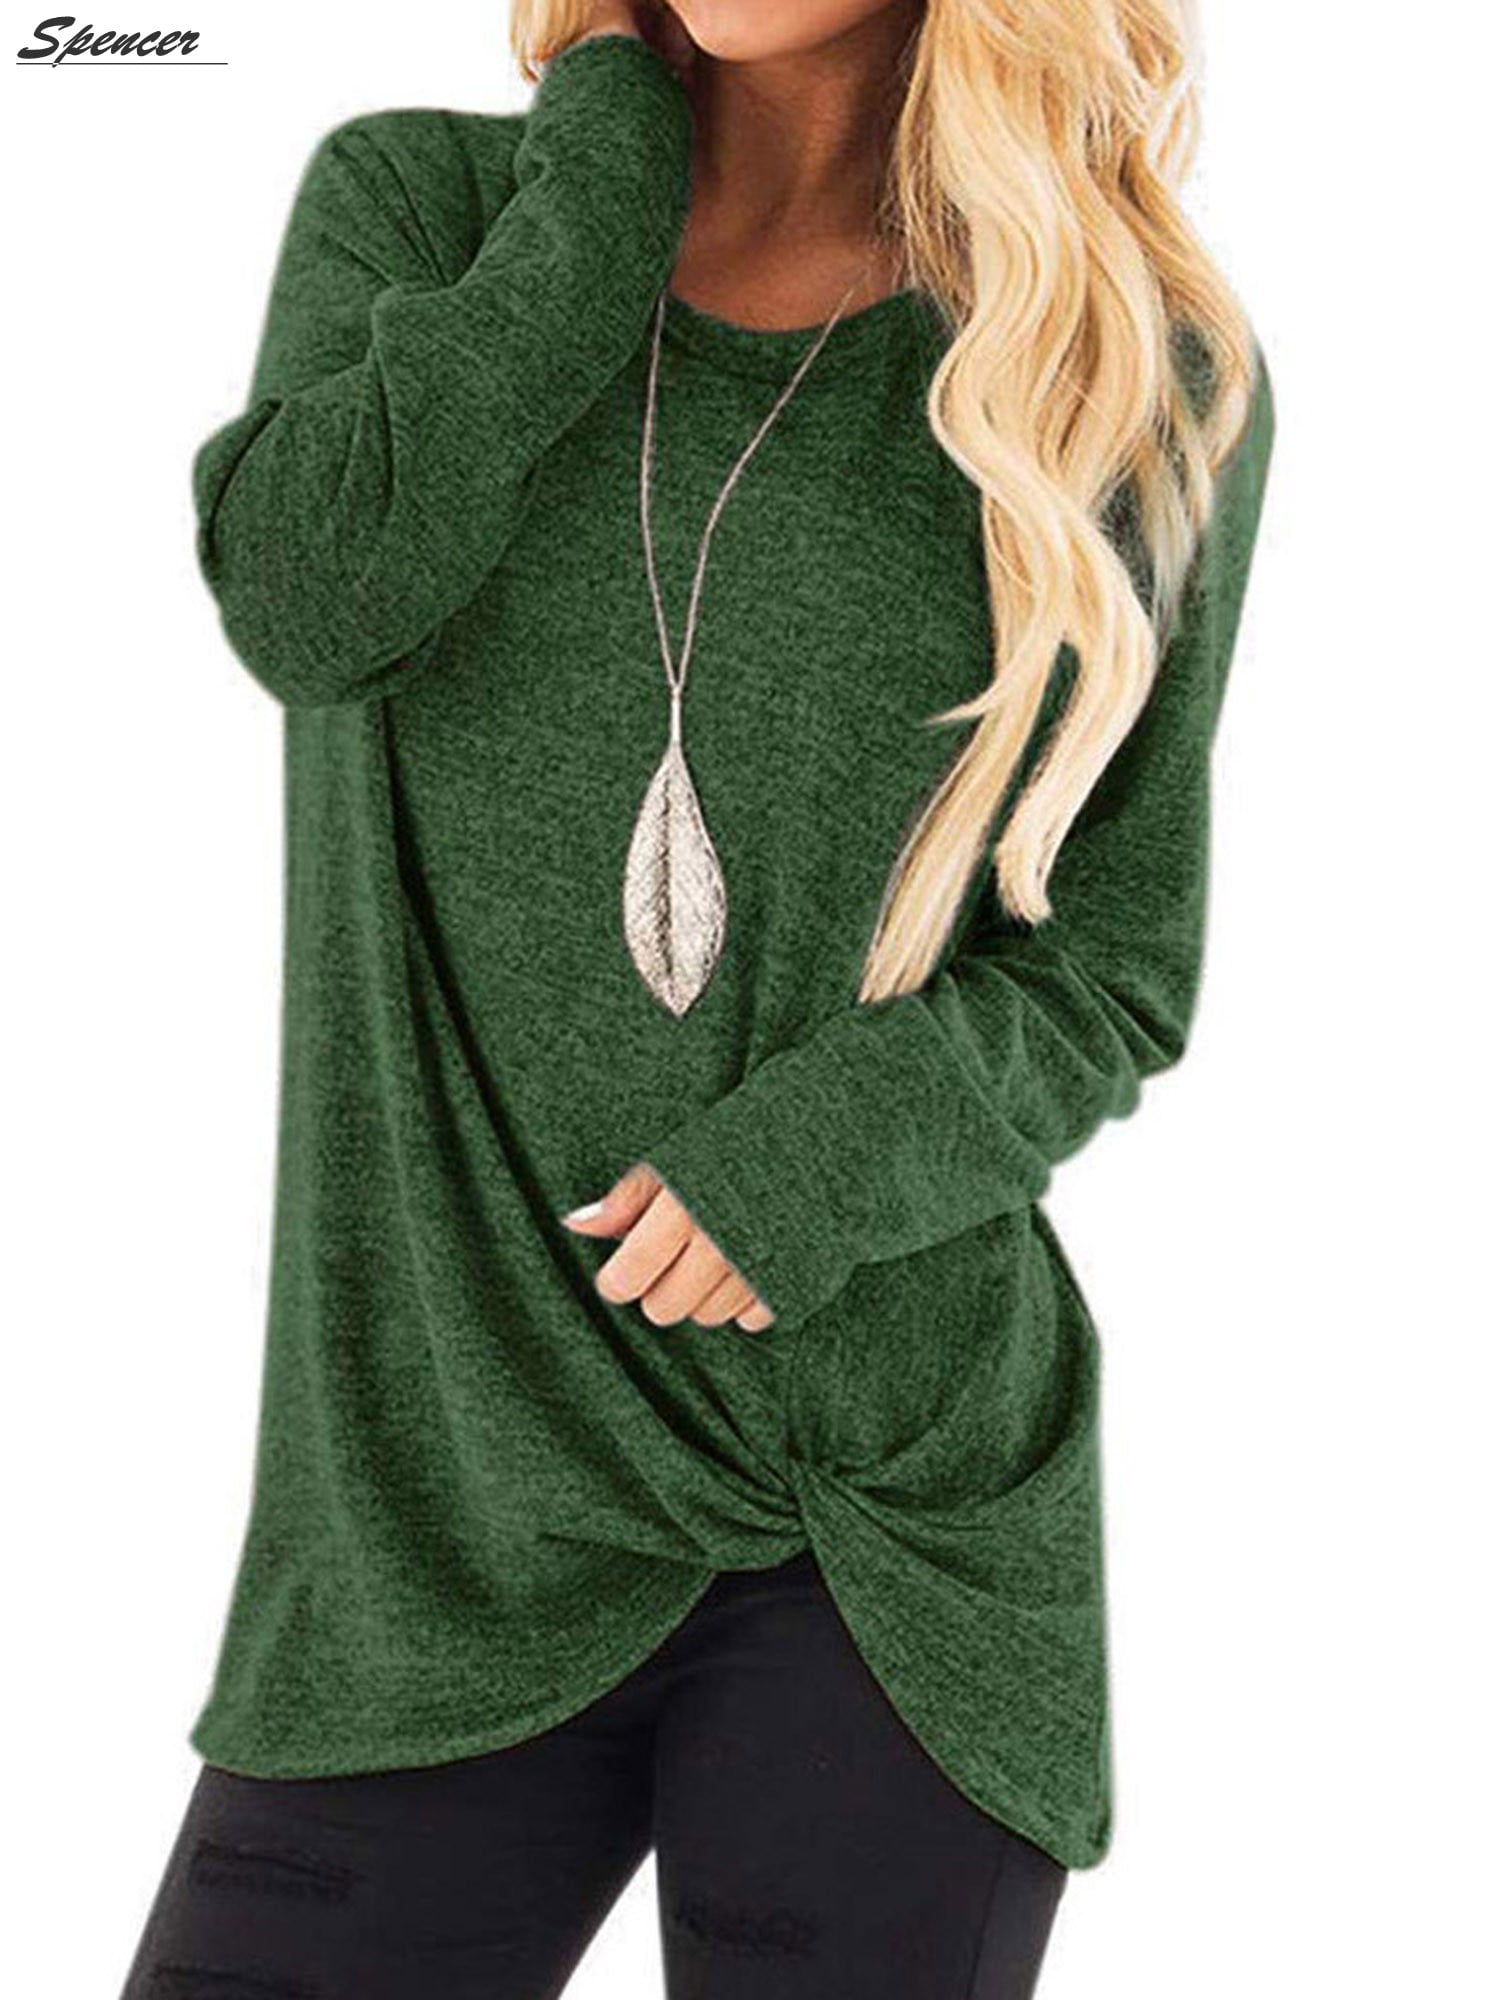 Spencer Women's Casual Long Sleeve Solid Sweatshirt Twist Knotted T ...